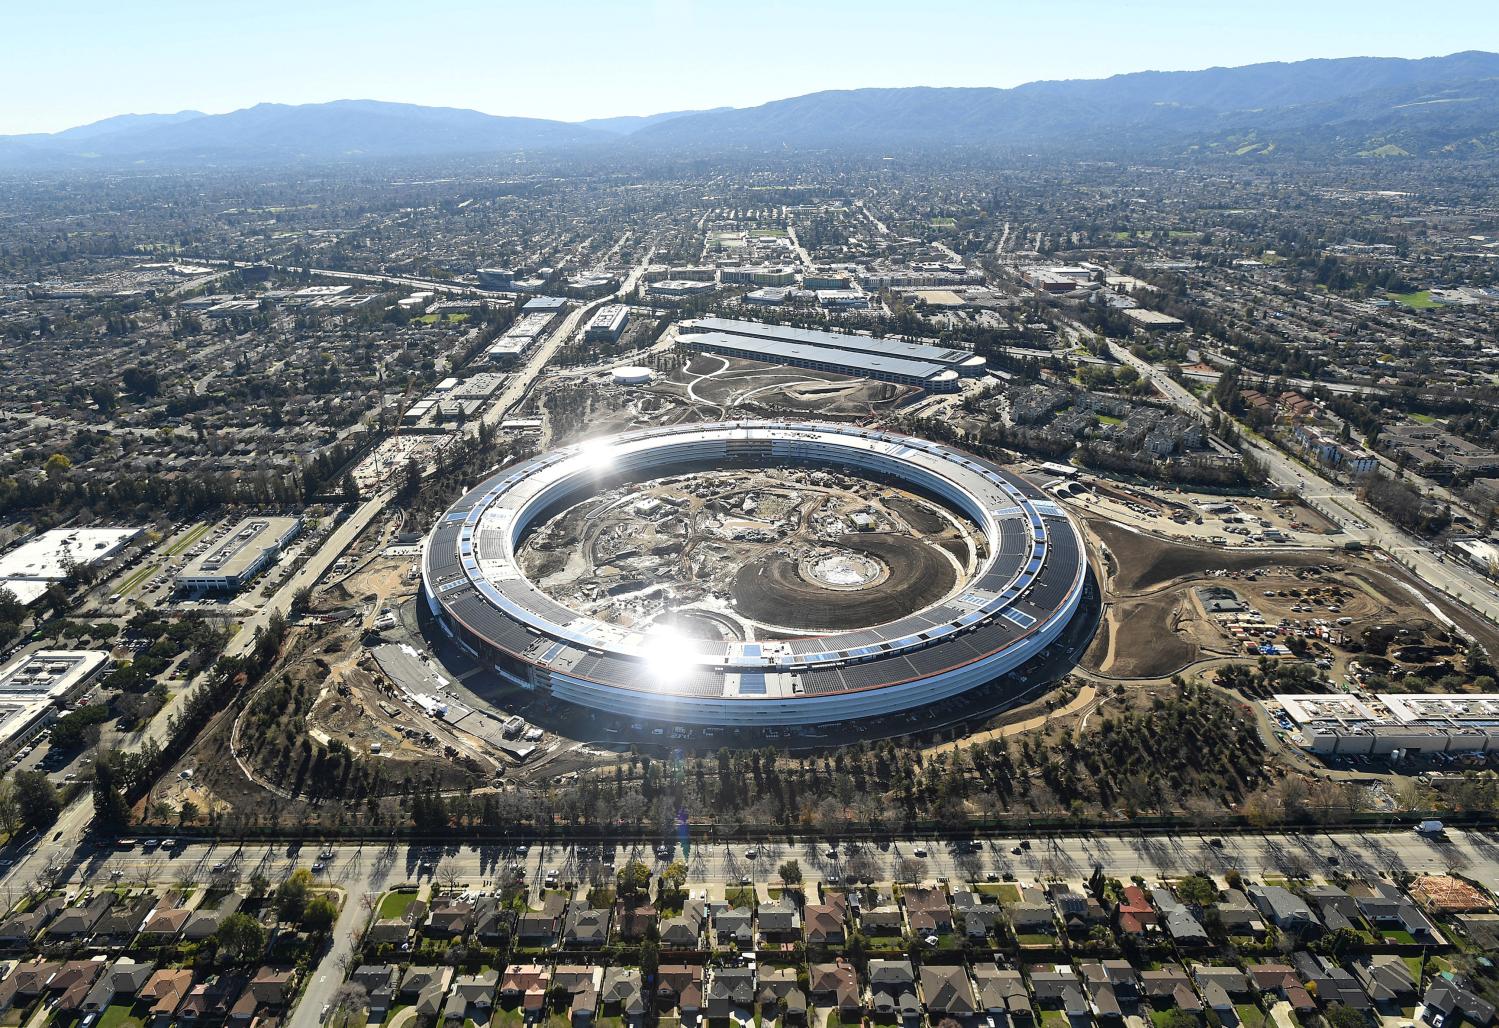 The Apple Campus 2 is seen under construction in Cupertino, California in this aerial photo.